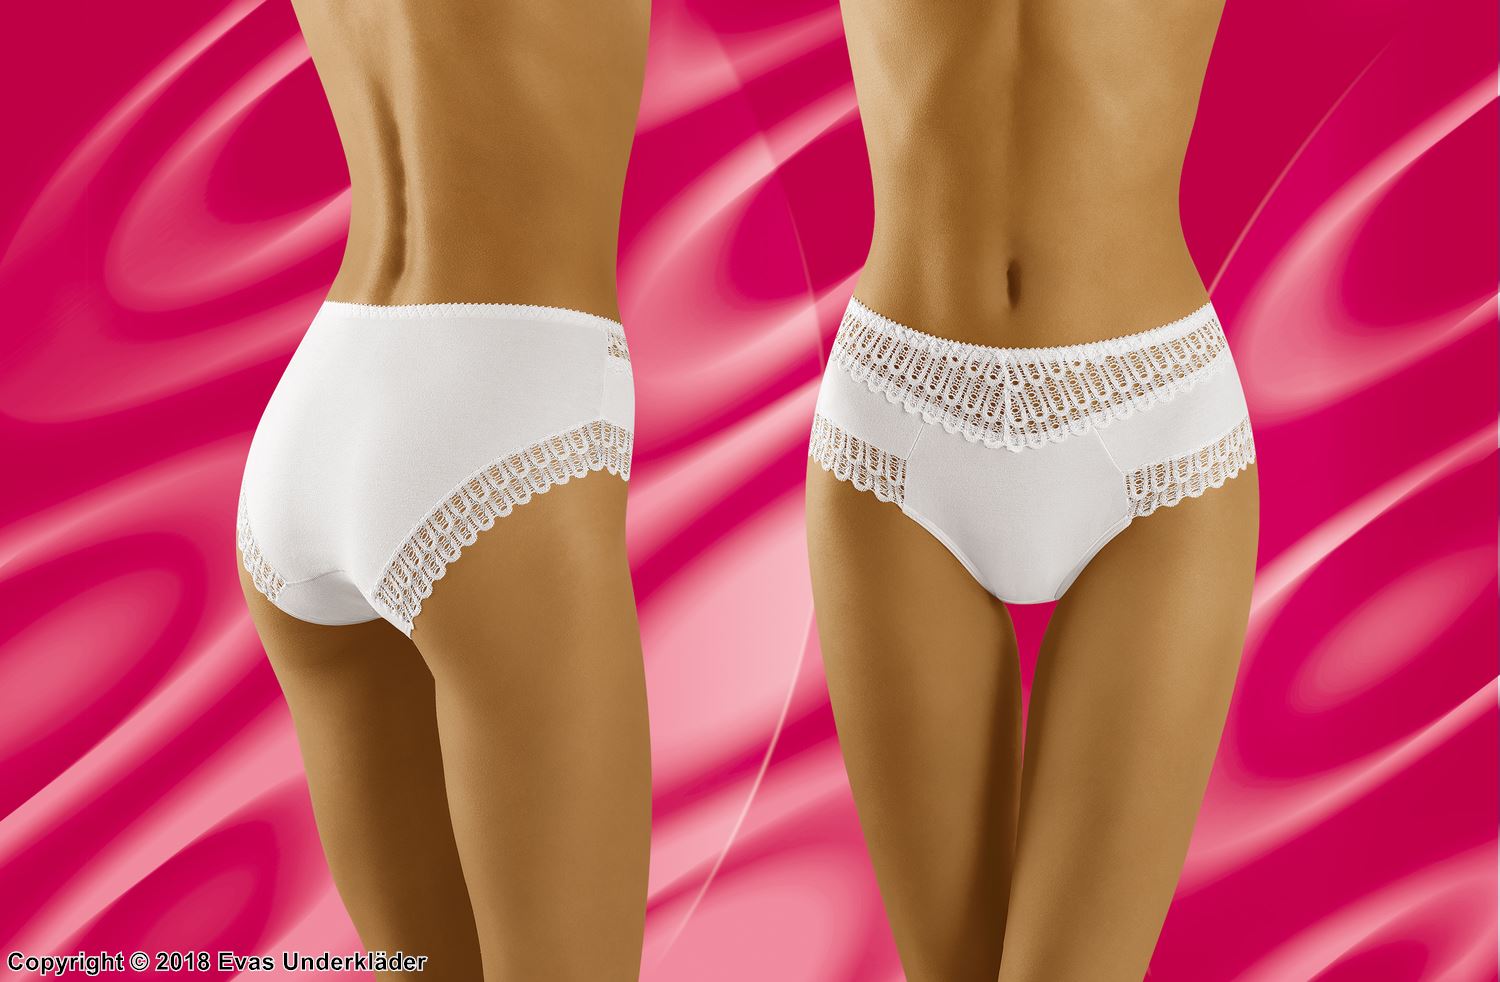 Briefs, cotton, lace inlays